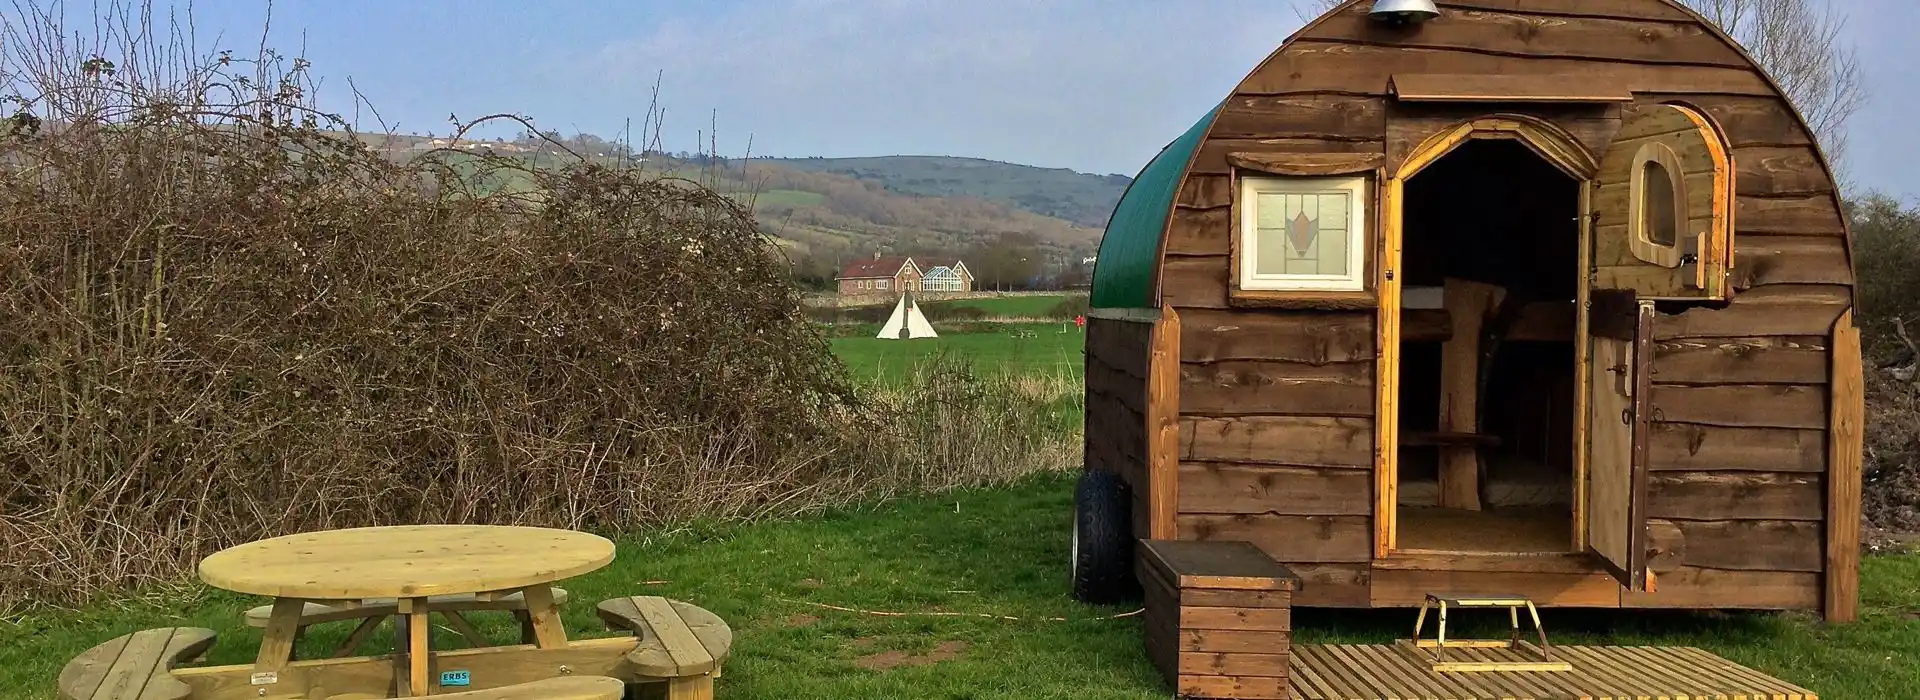 Camping pods in Somerset